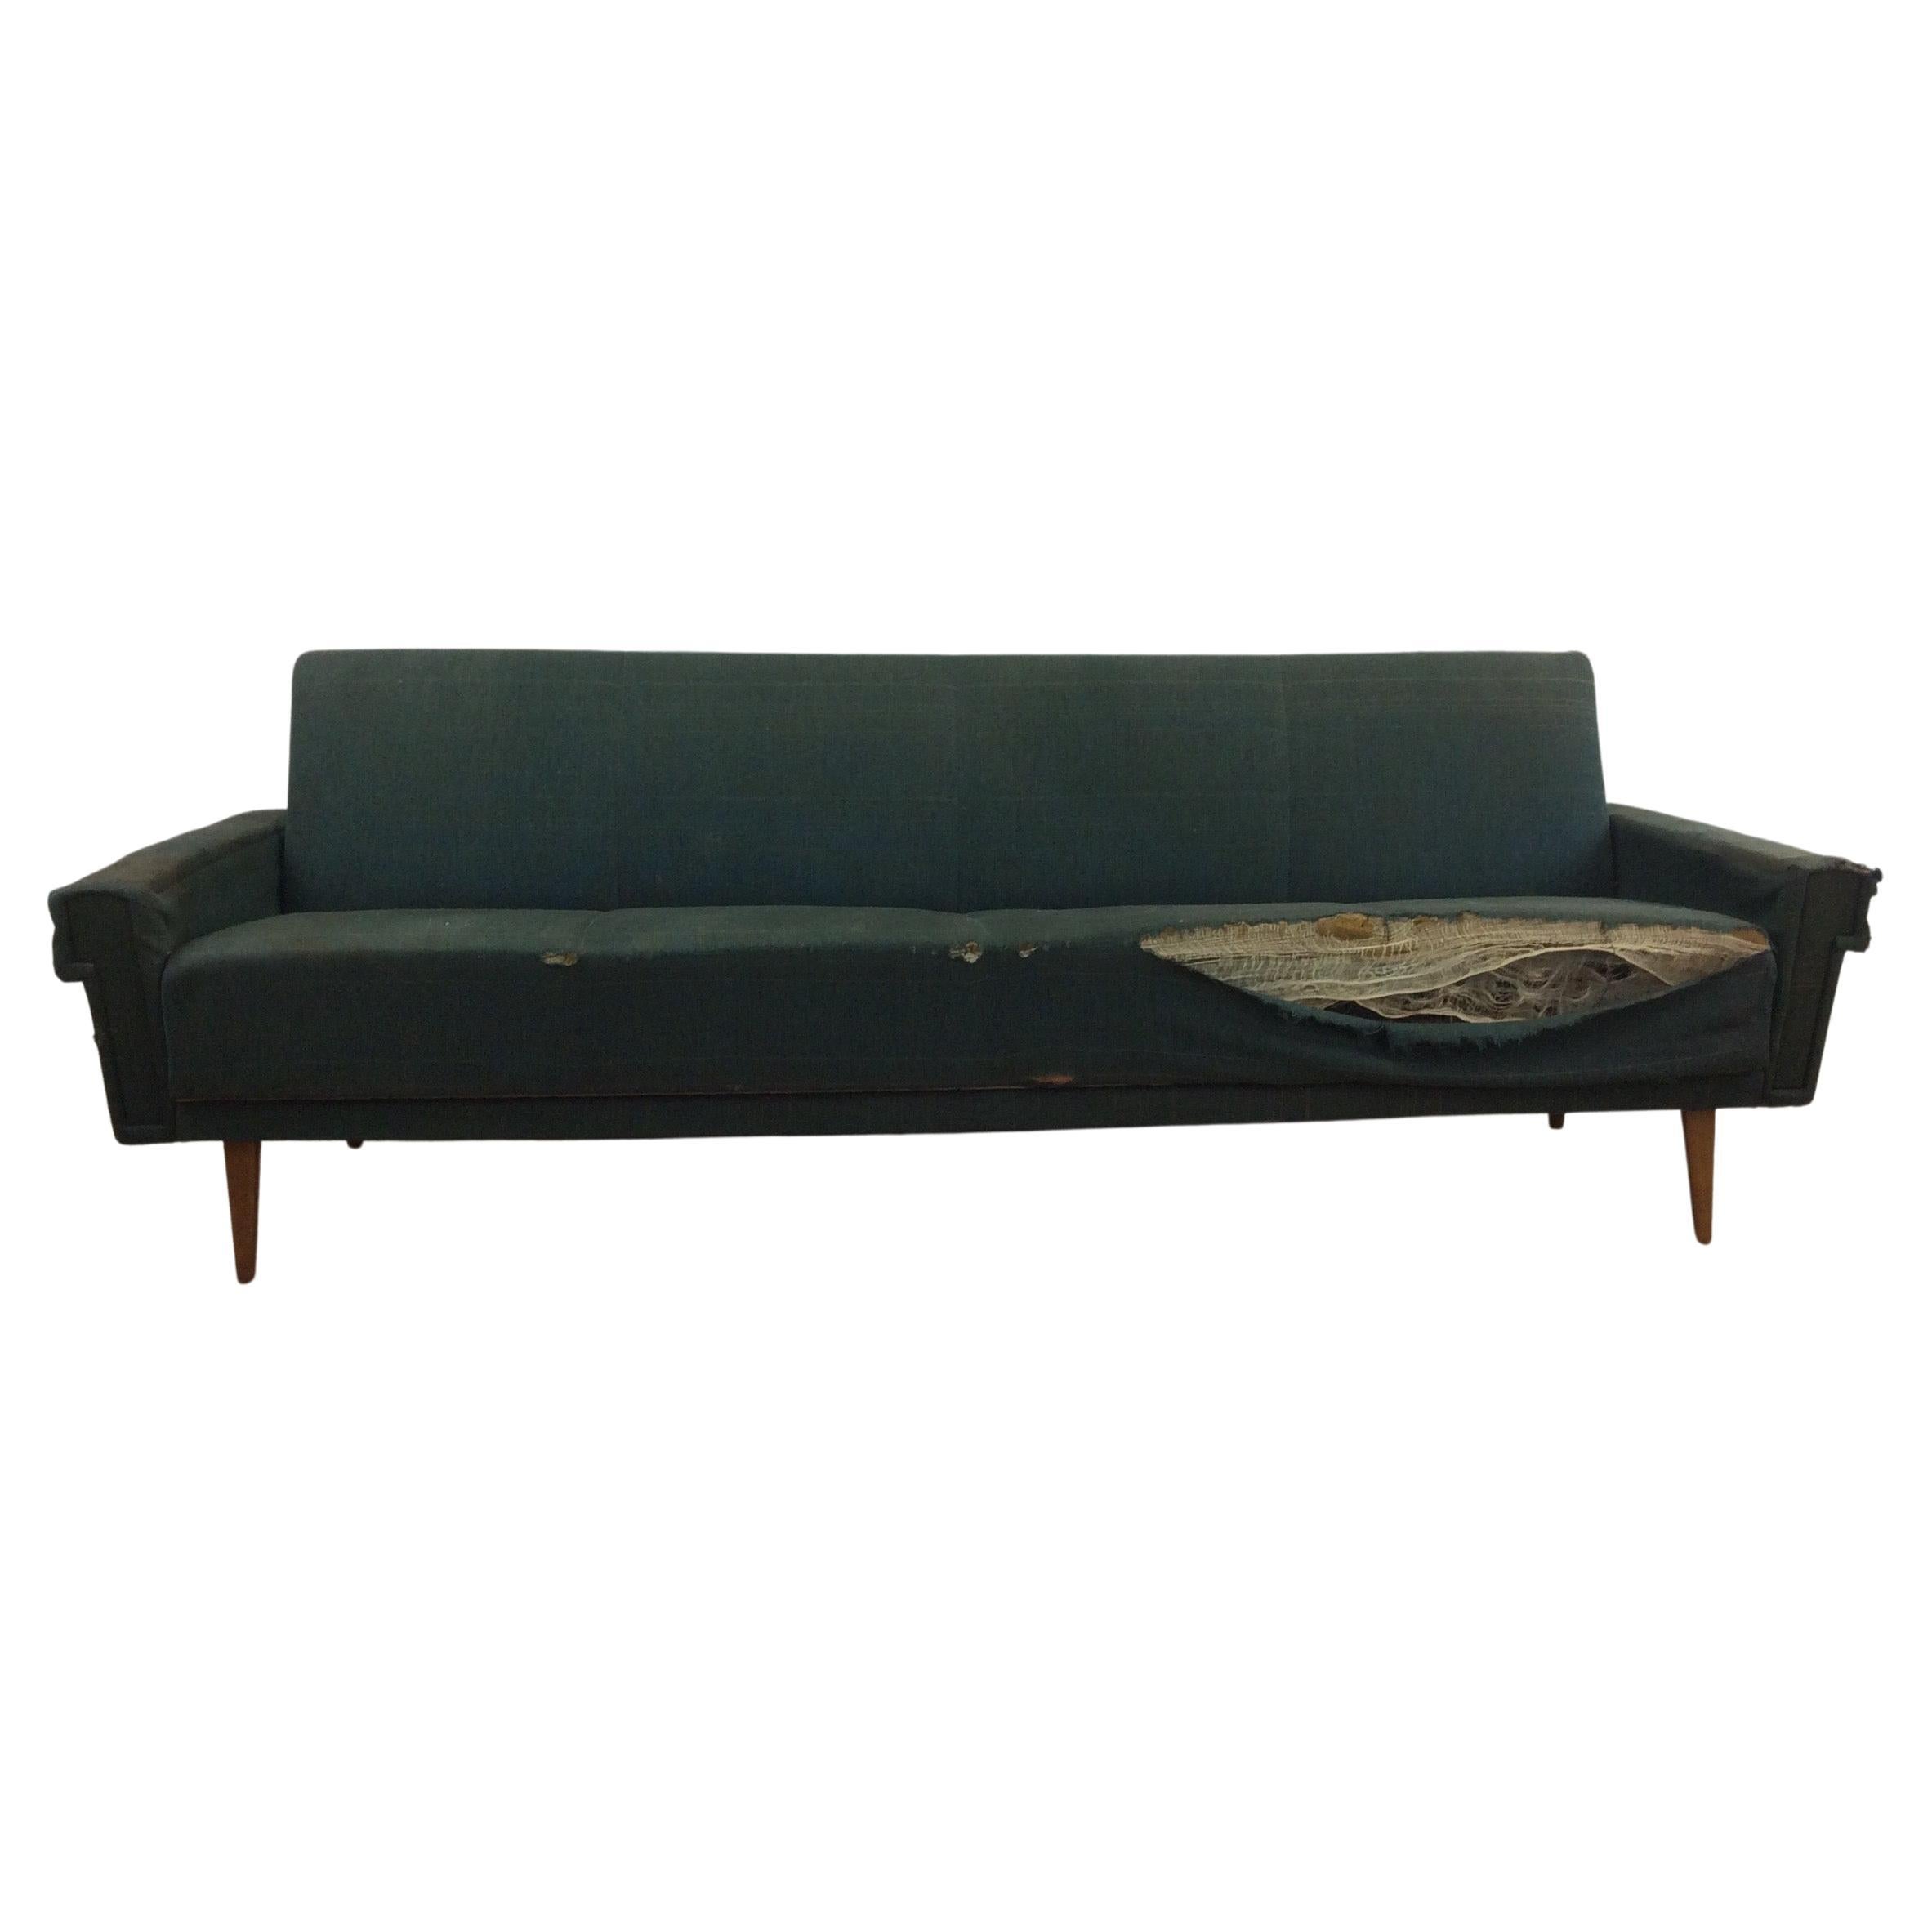 Mid-Century Modern Daybed Sleeper Sofa For Sale